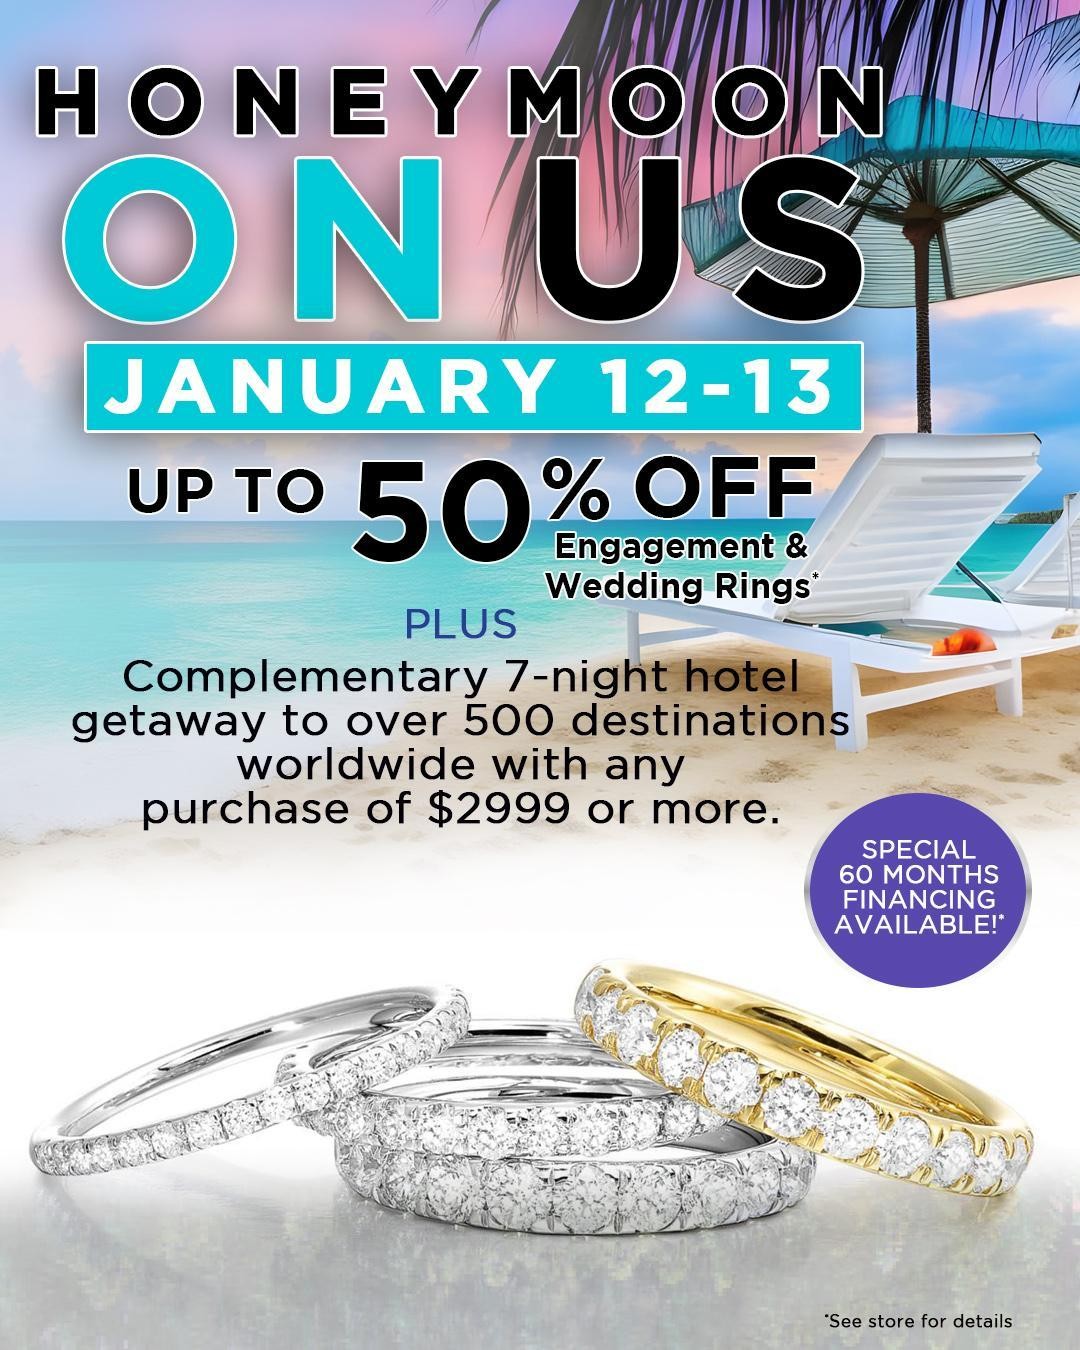 When you make a purchase of $2999 or more between January 12-13 and 19-20 at any Huntington Fine Jewelers location, receive a free 7 night getaway of your choice!